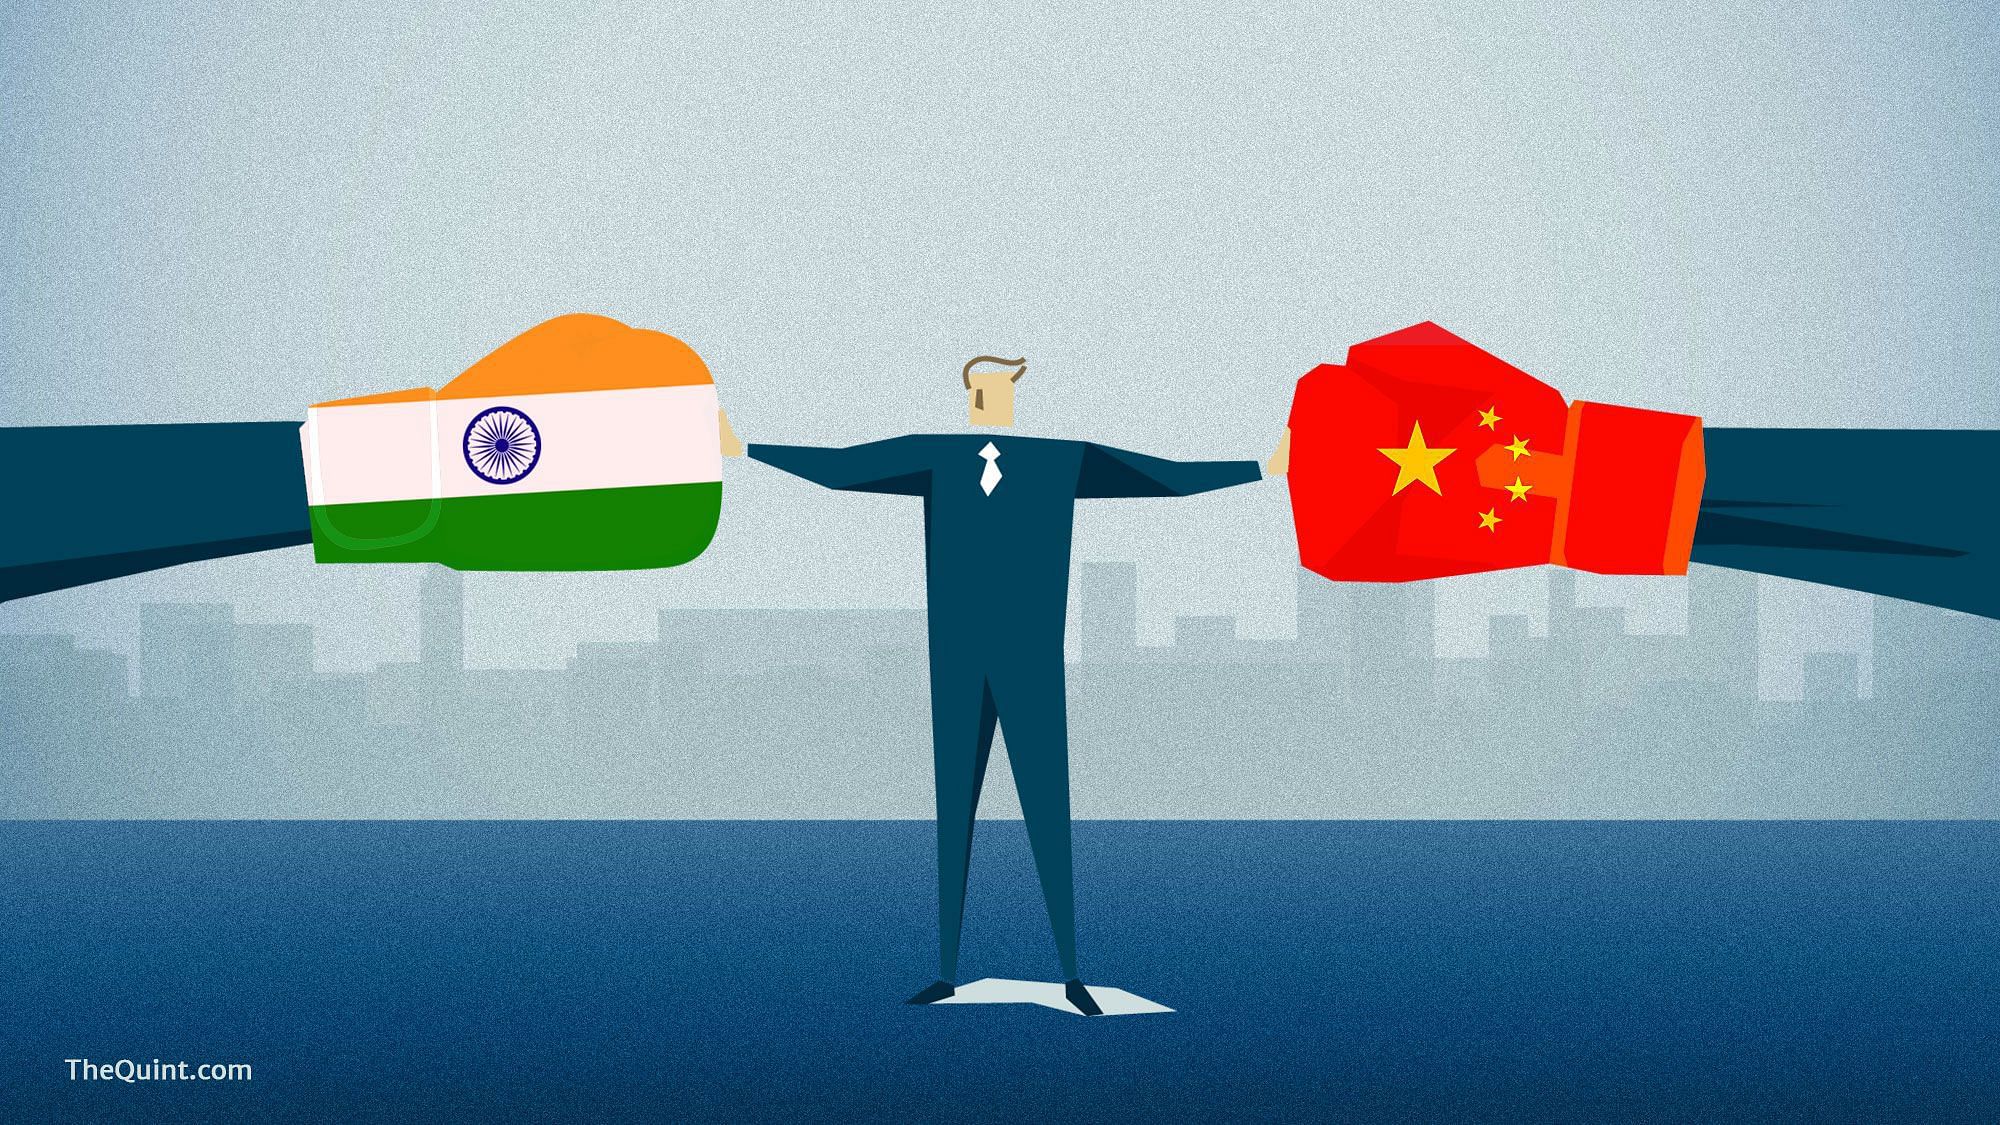 The relationship between China and India “have been developing quite steadily over the years”.